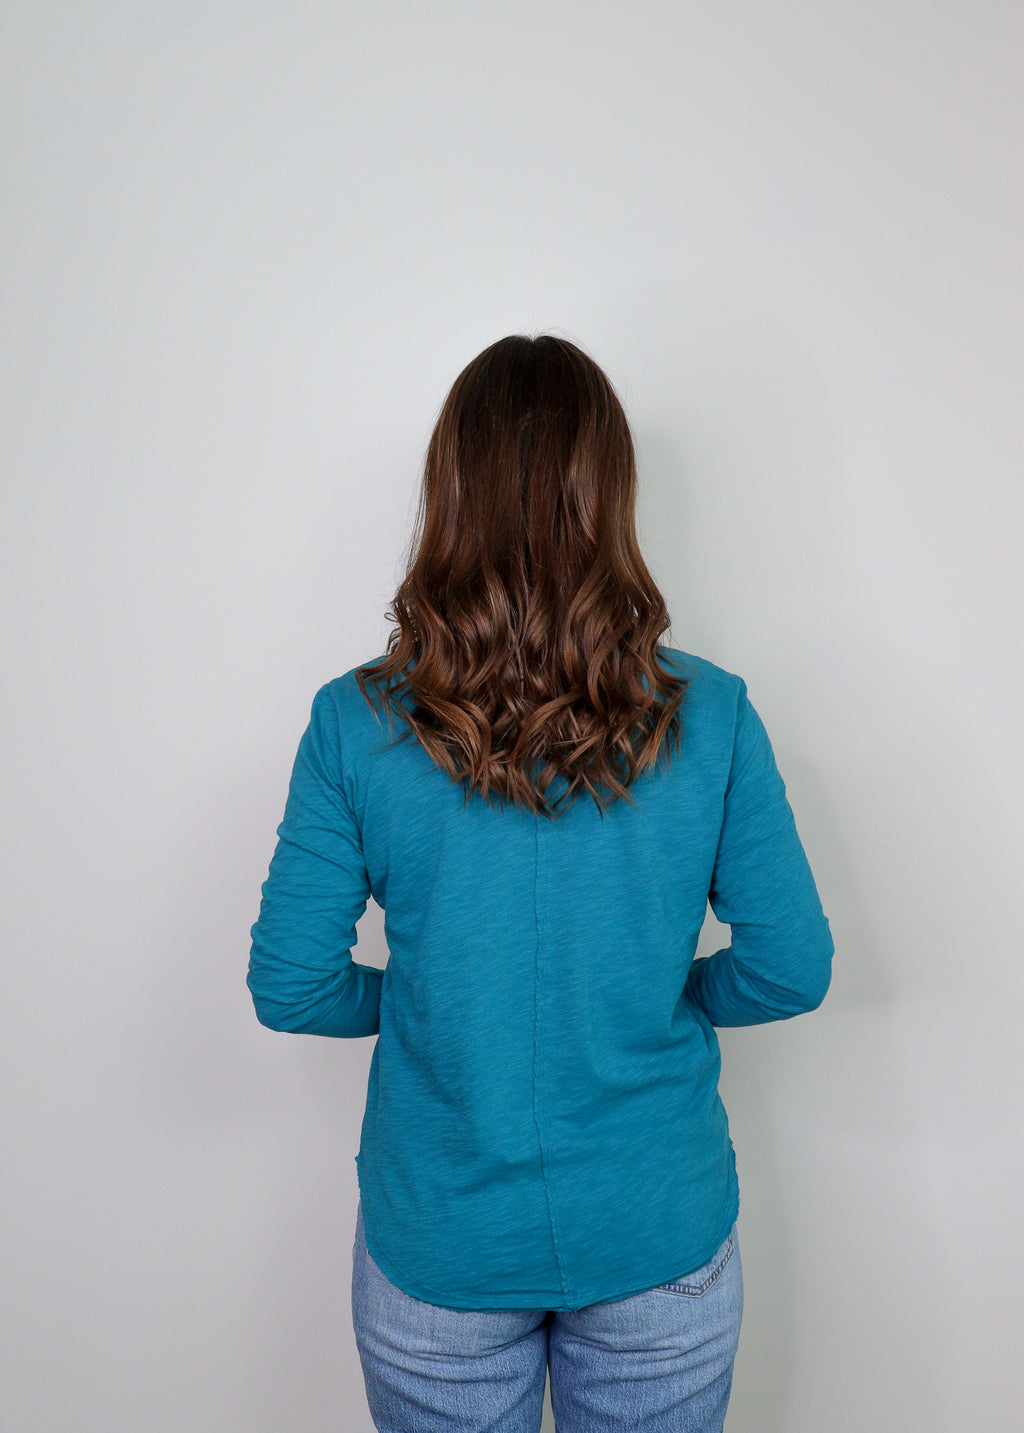 V-Neck Long Sleeve Front Seam Tee—Teal